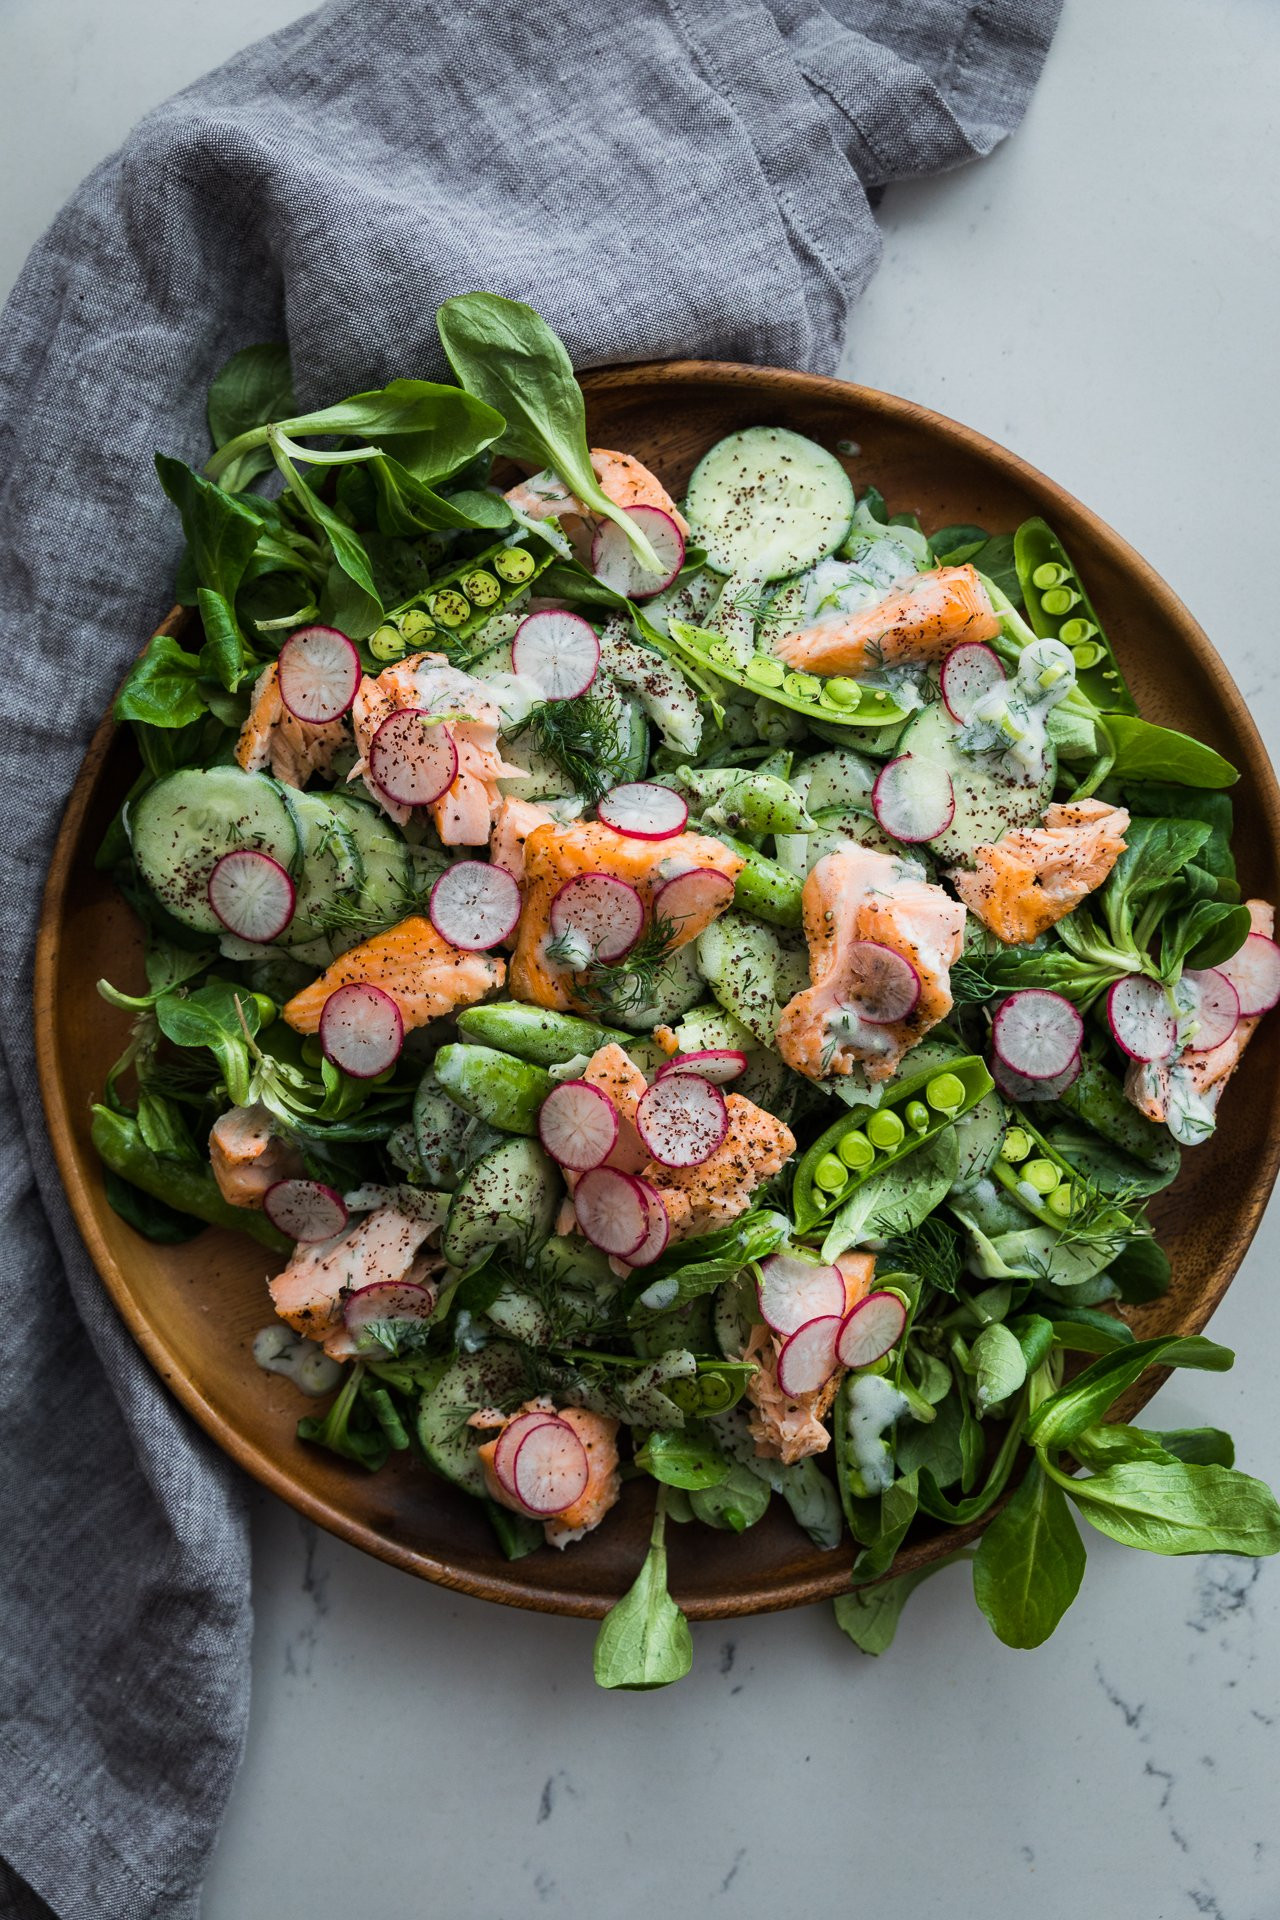 15 Dressings for Salmon Salad You Can Make In 5 Minutes